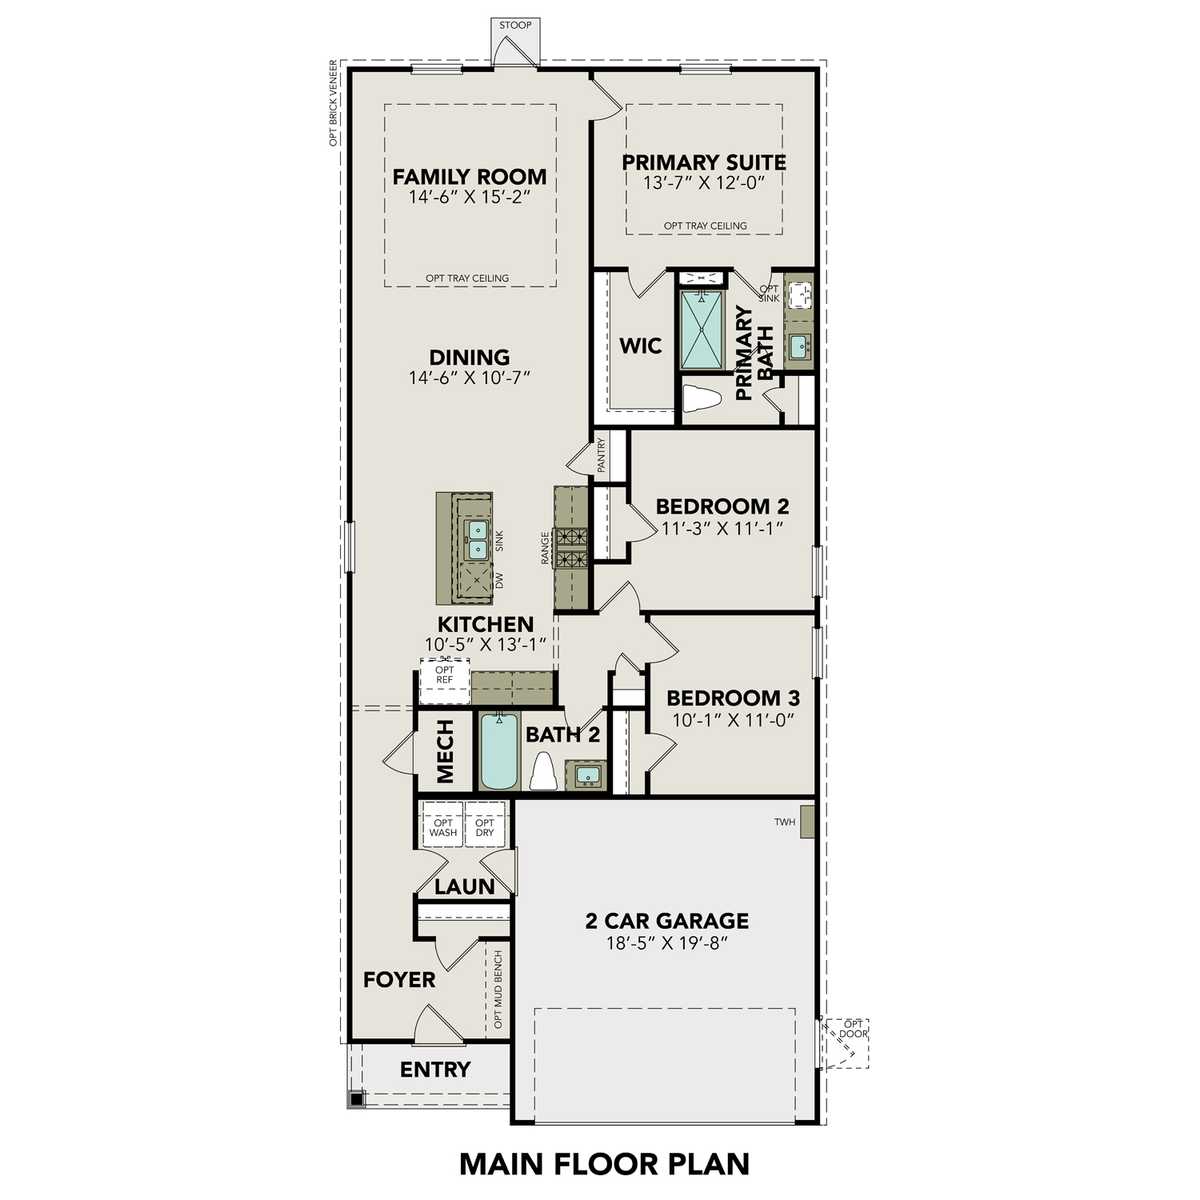 1 - The Frio Brick floor plan layout for 8328 Bristlecone Pine Way in Davidson Homes' Lakes at Black Oak community.